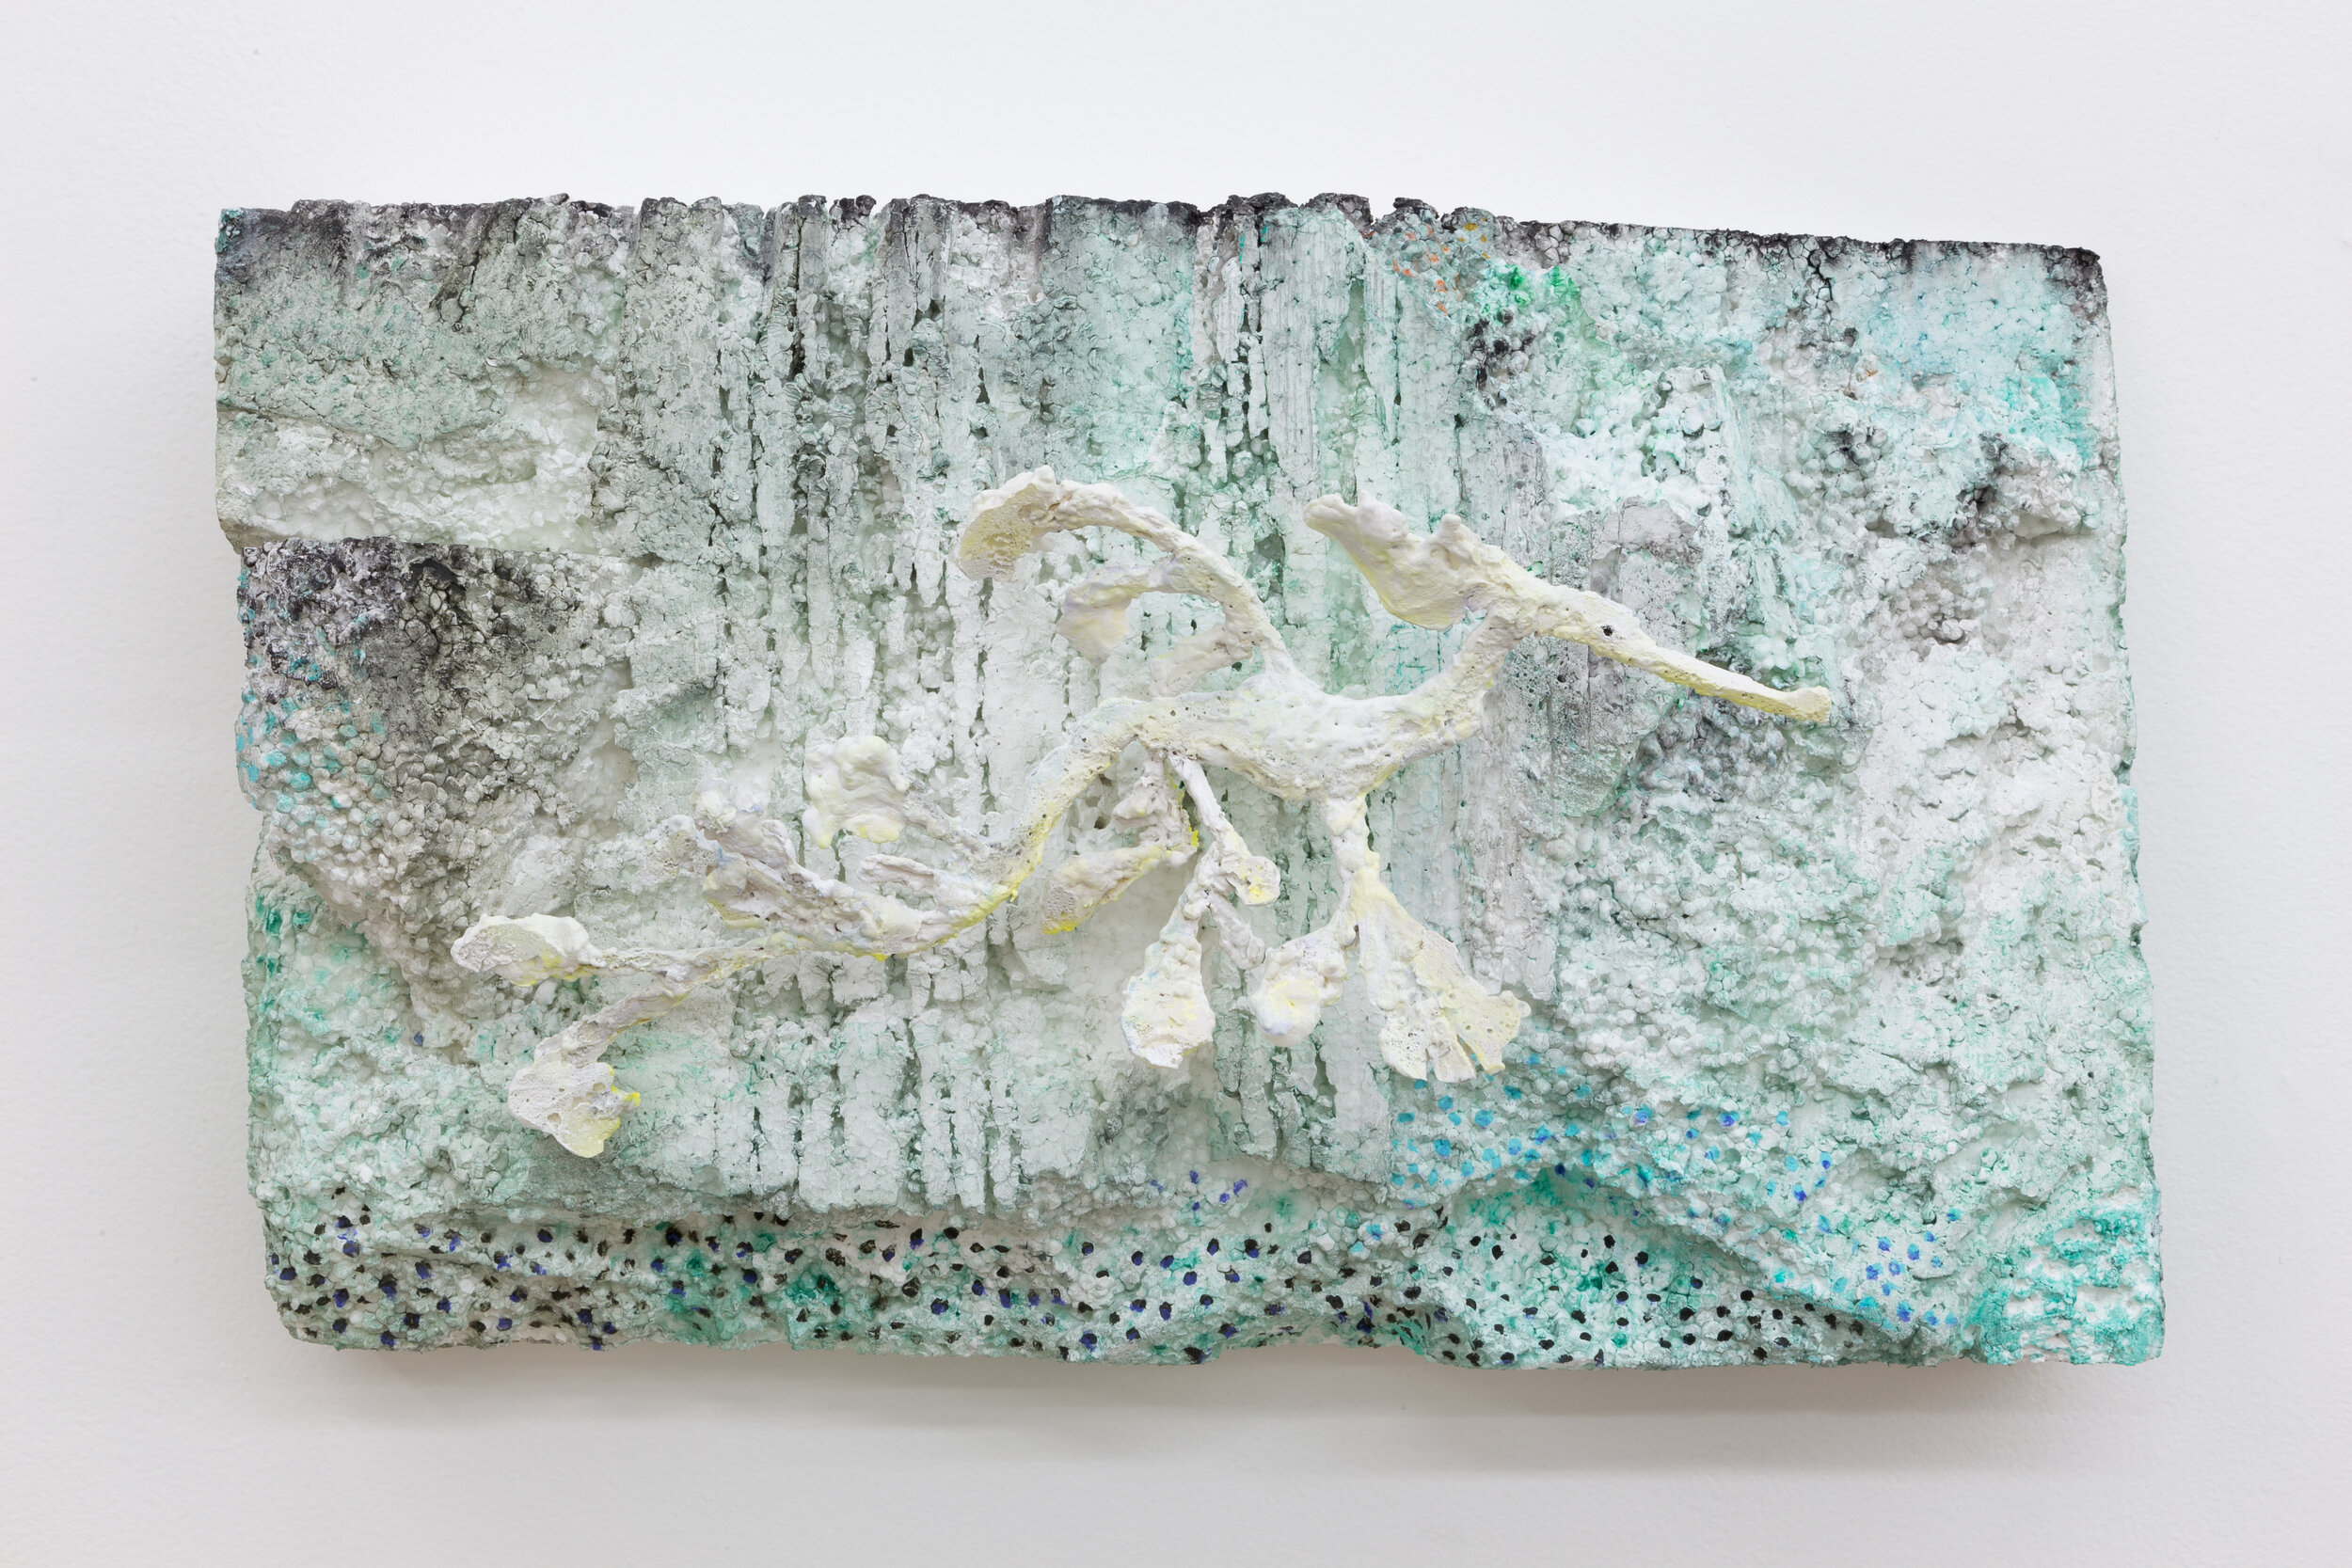  Lin May Saeed  Sea Dragon Relief V / Teneen Albaher Relief V,  2019. Styrofoam, steel, acrylic paint, 11.625 x 19.75 x 6.75 in. 